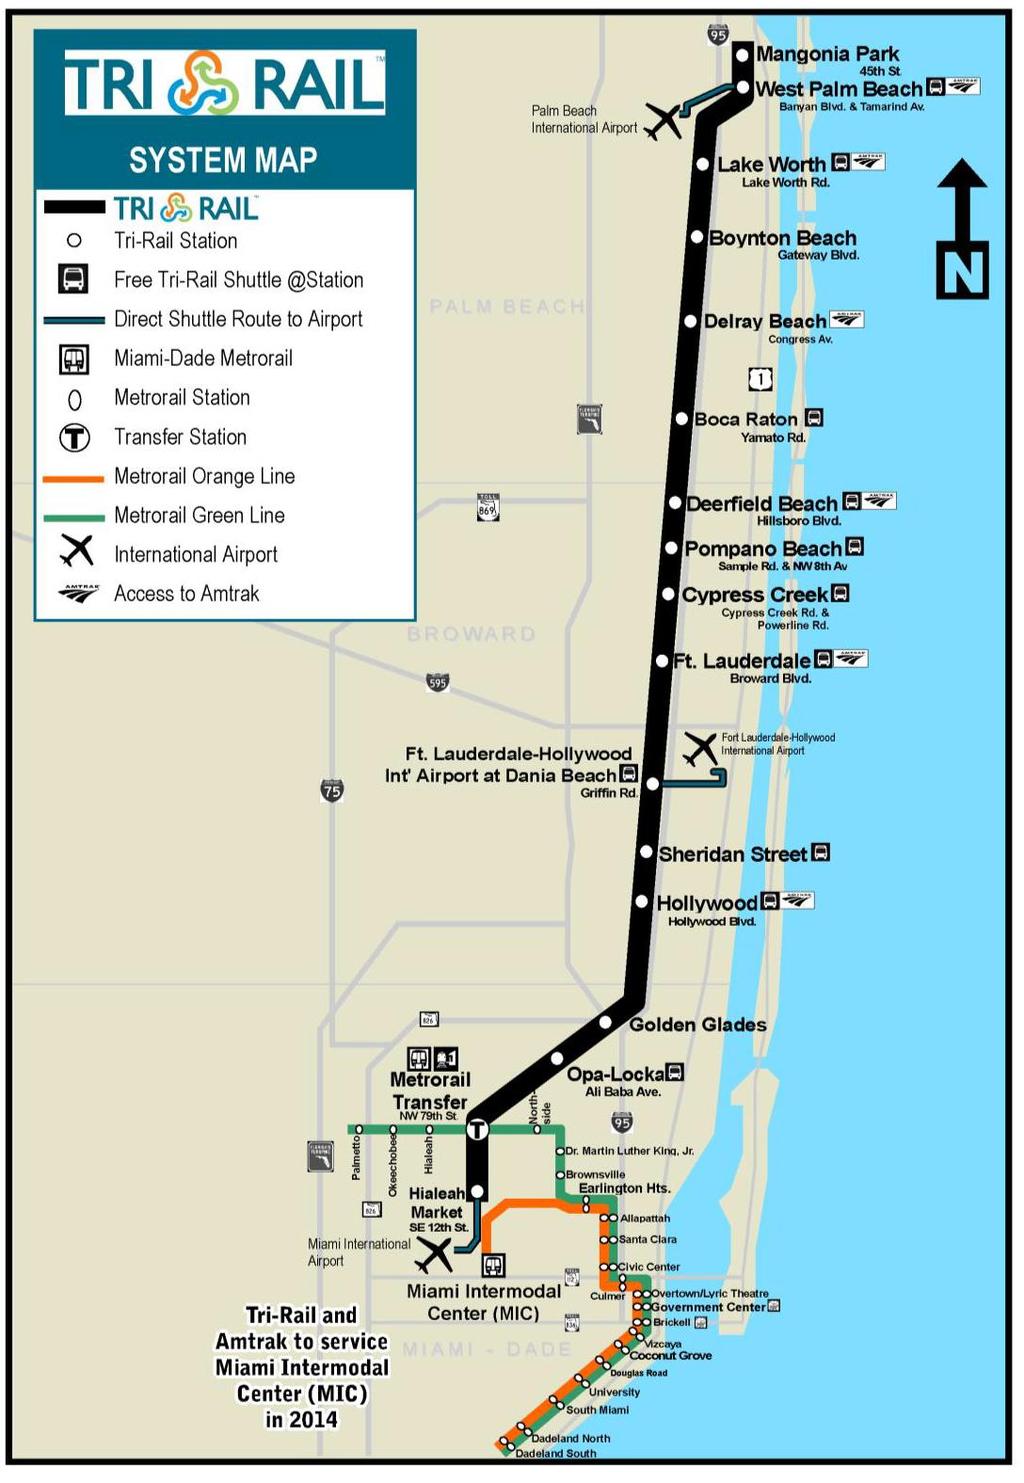 Tri-Rail Overview 72-mile commuter rail system in Southeast Florida 17 stations across 3 counties 1hr 45min traveling time 50